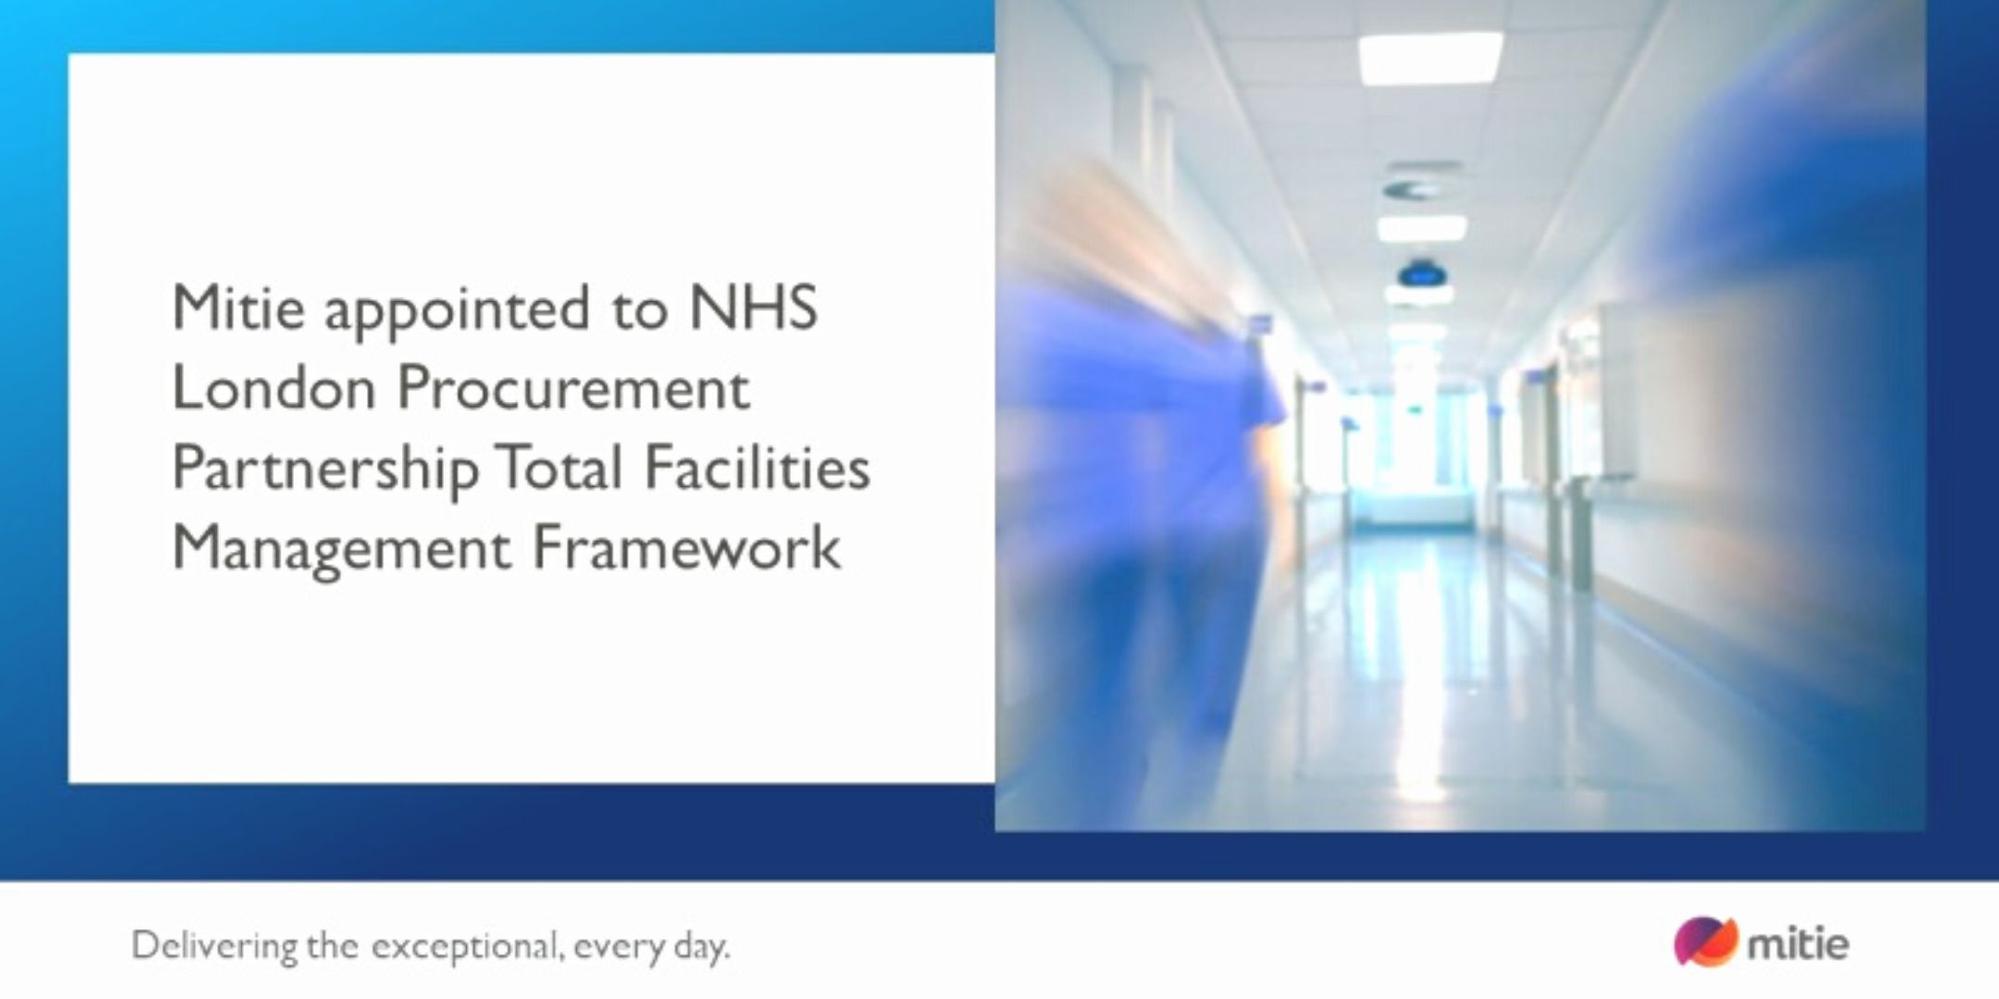 Mitie appointed to NHS London Procurement Partnership Total Facilities Management Framework